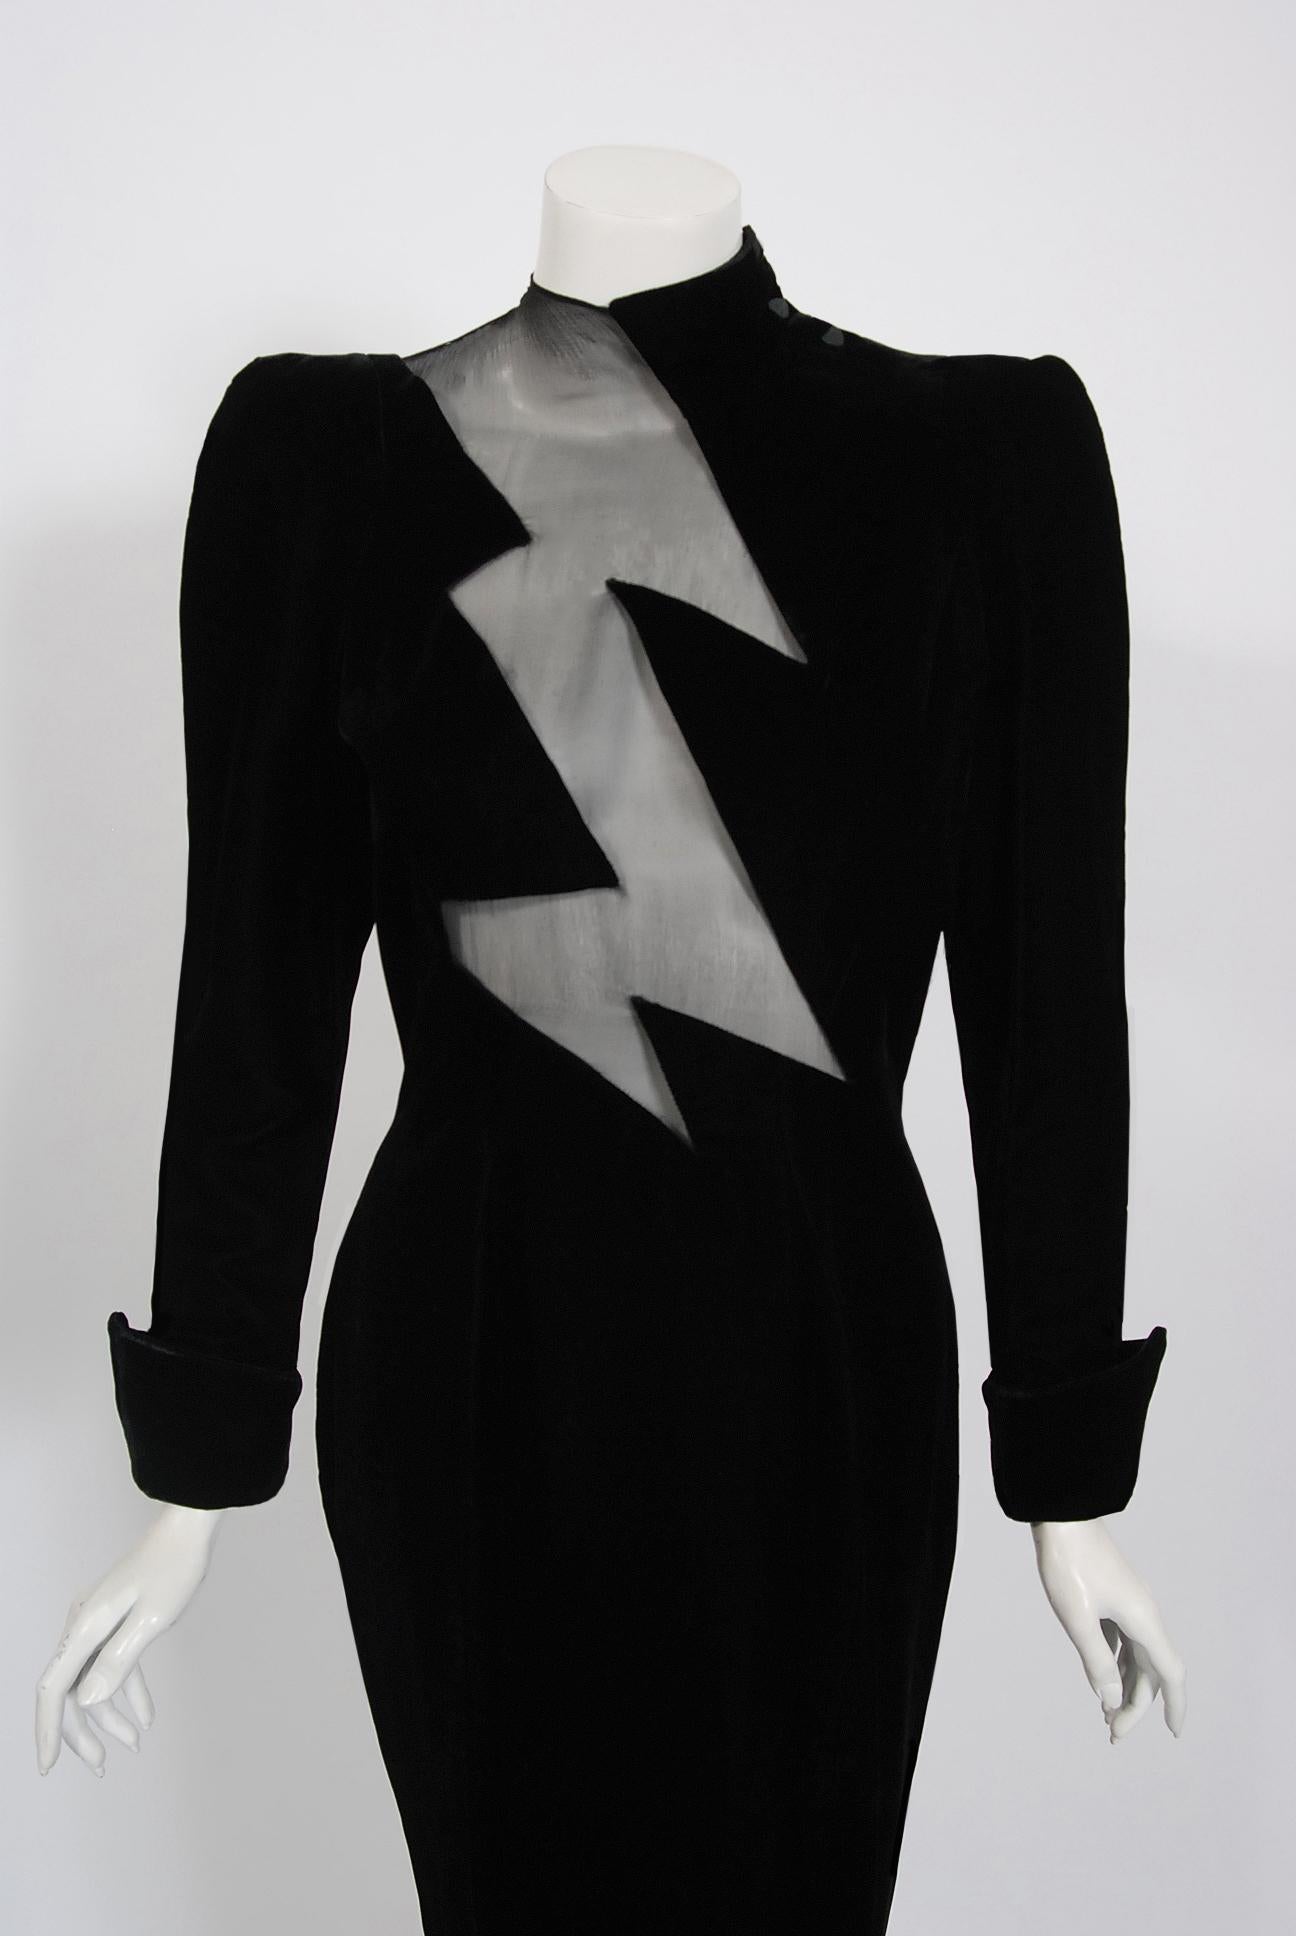 Iconic Fall Winter 1988-89 Thierry Mugler documented runway dress in the most flattering hourglass shape. This legendary French fashion designer is known for bold fashion and edgy, sometimes even campy, theatricality. Though Mugler stopped designing